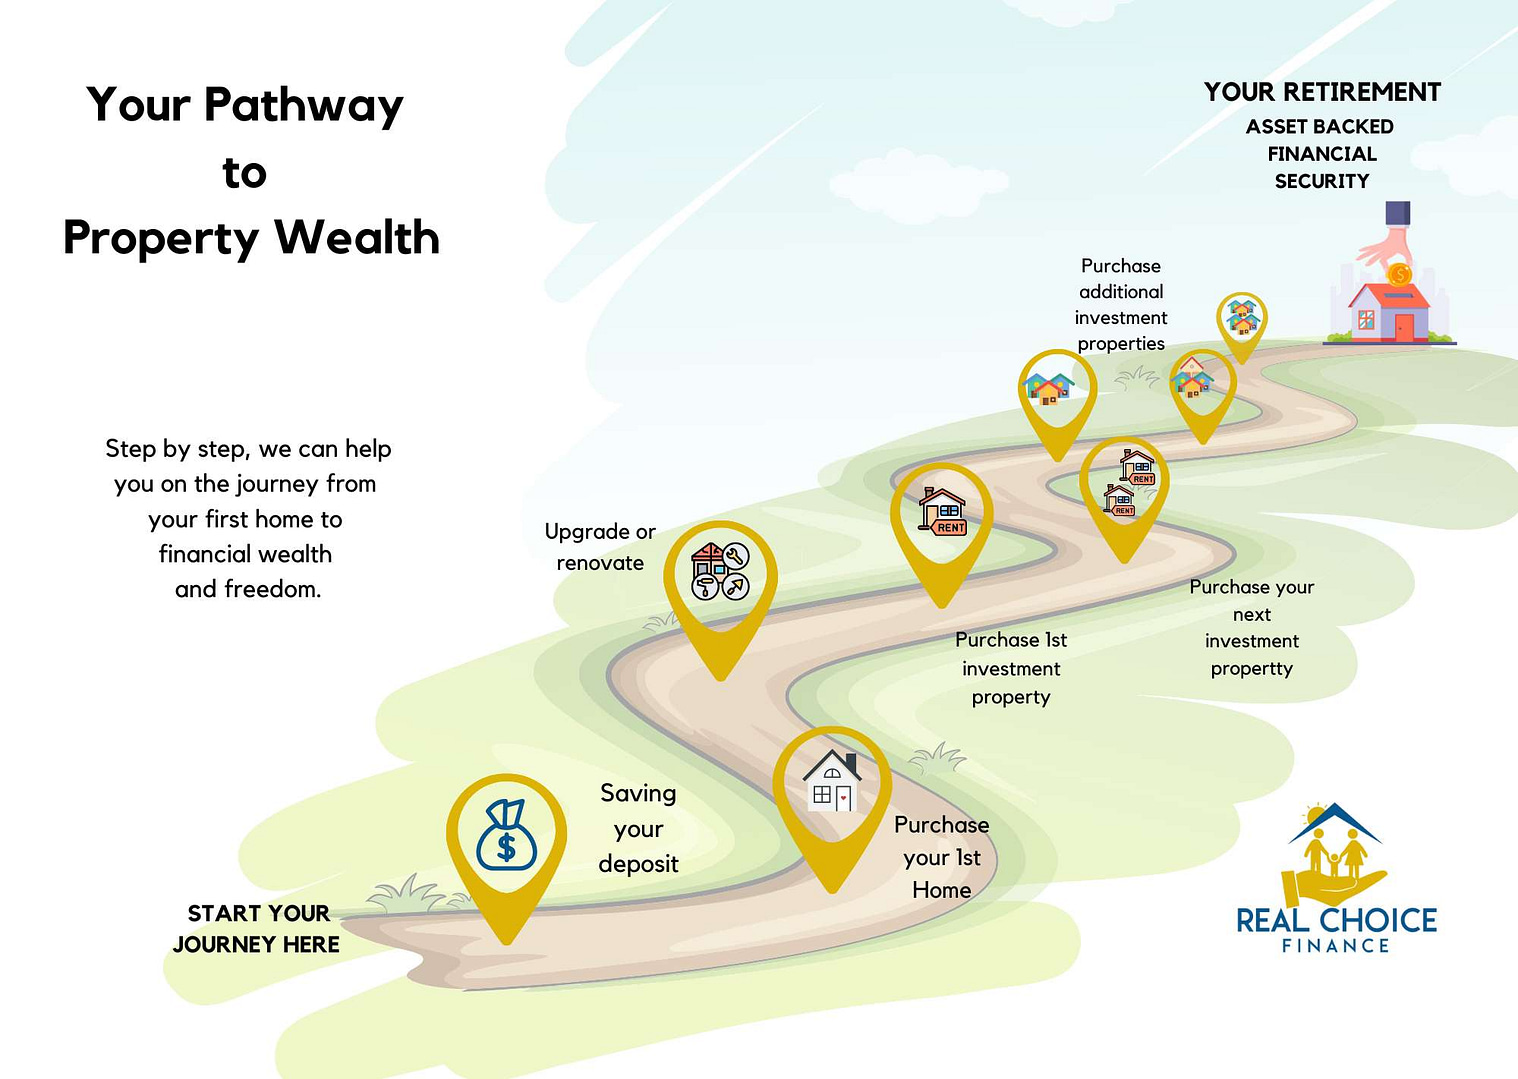 Pathway to asset backed financial security